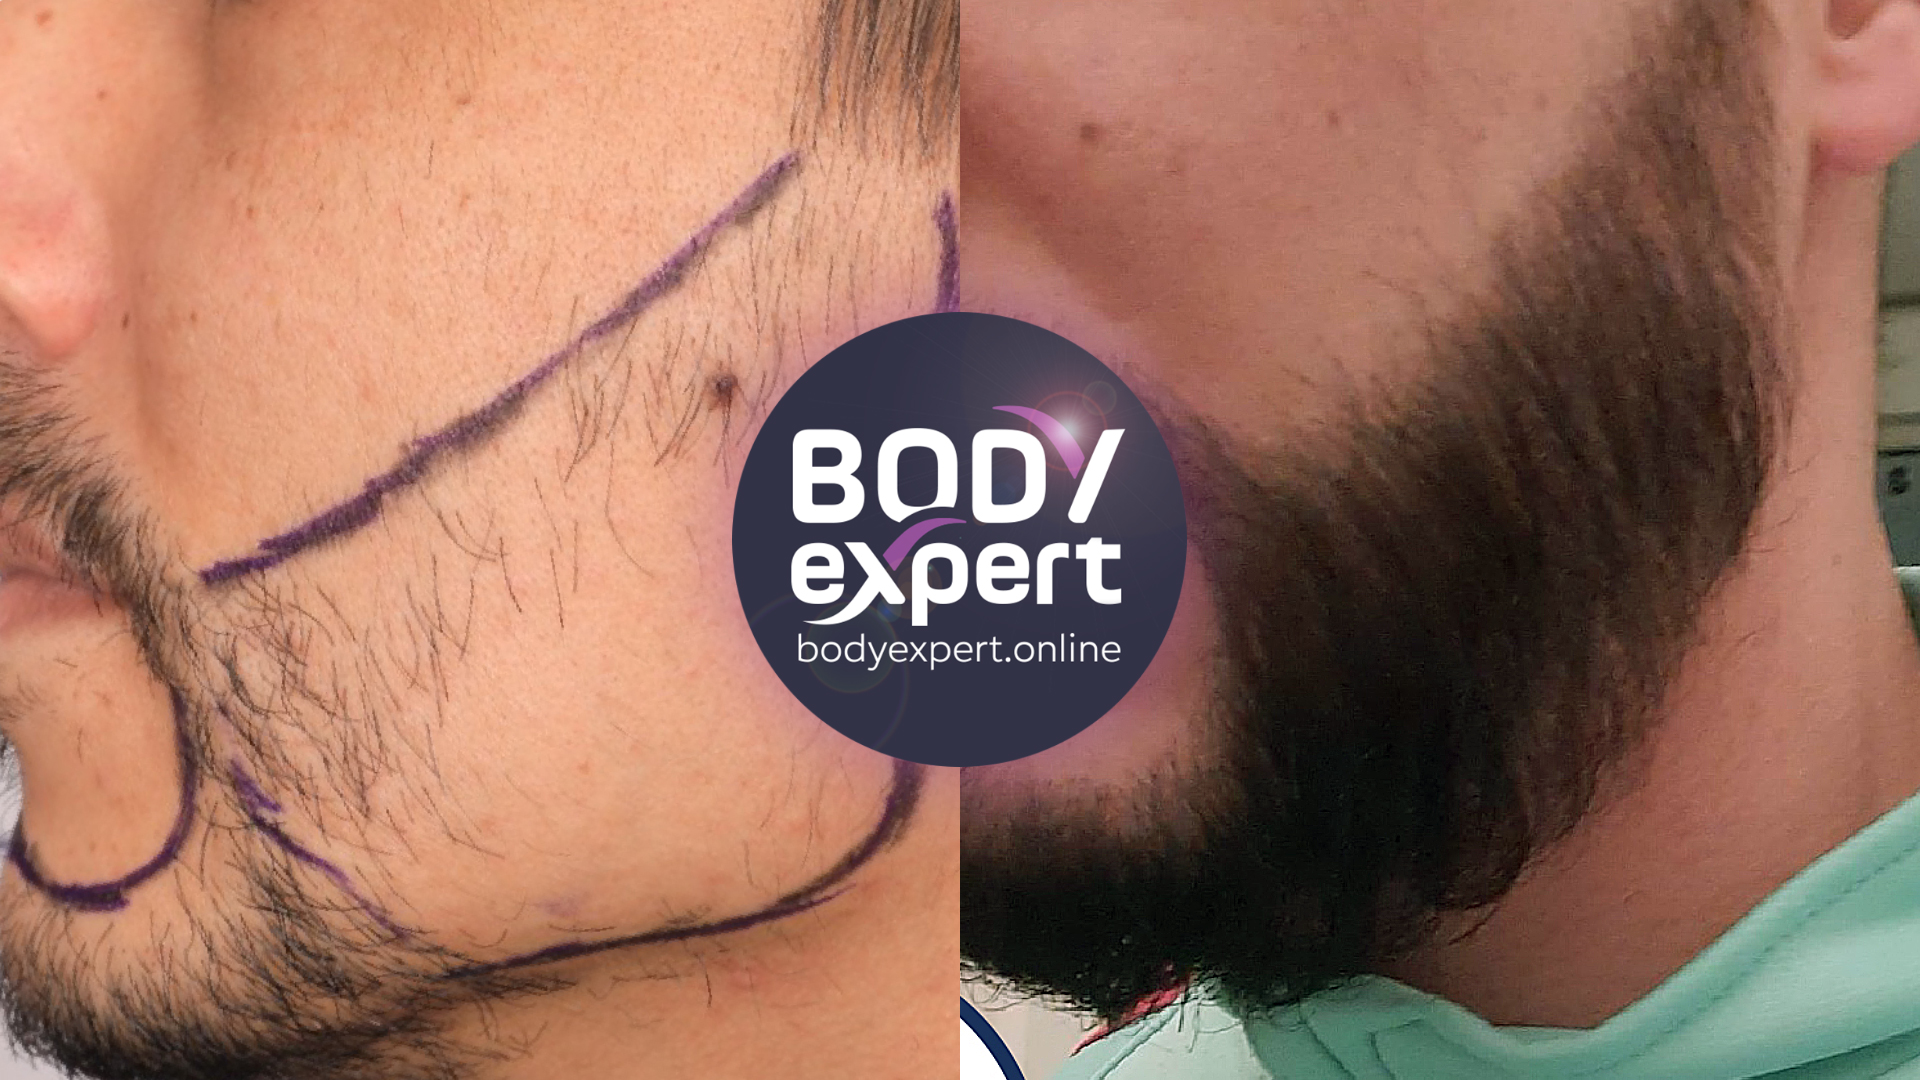 Beard transplant in Turkey : the results after 3500 grafts and 13 months